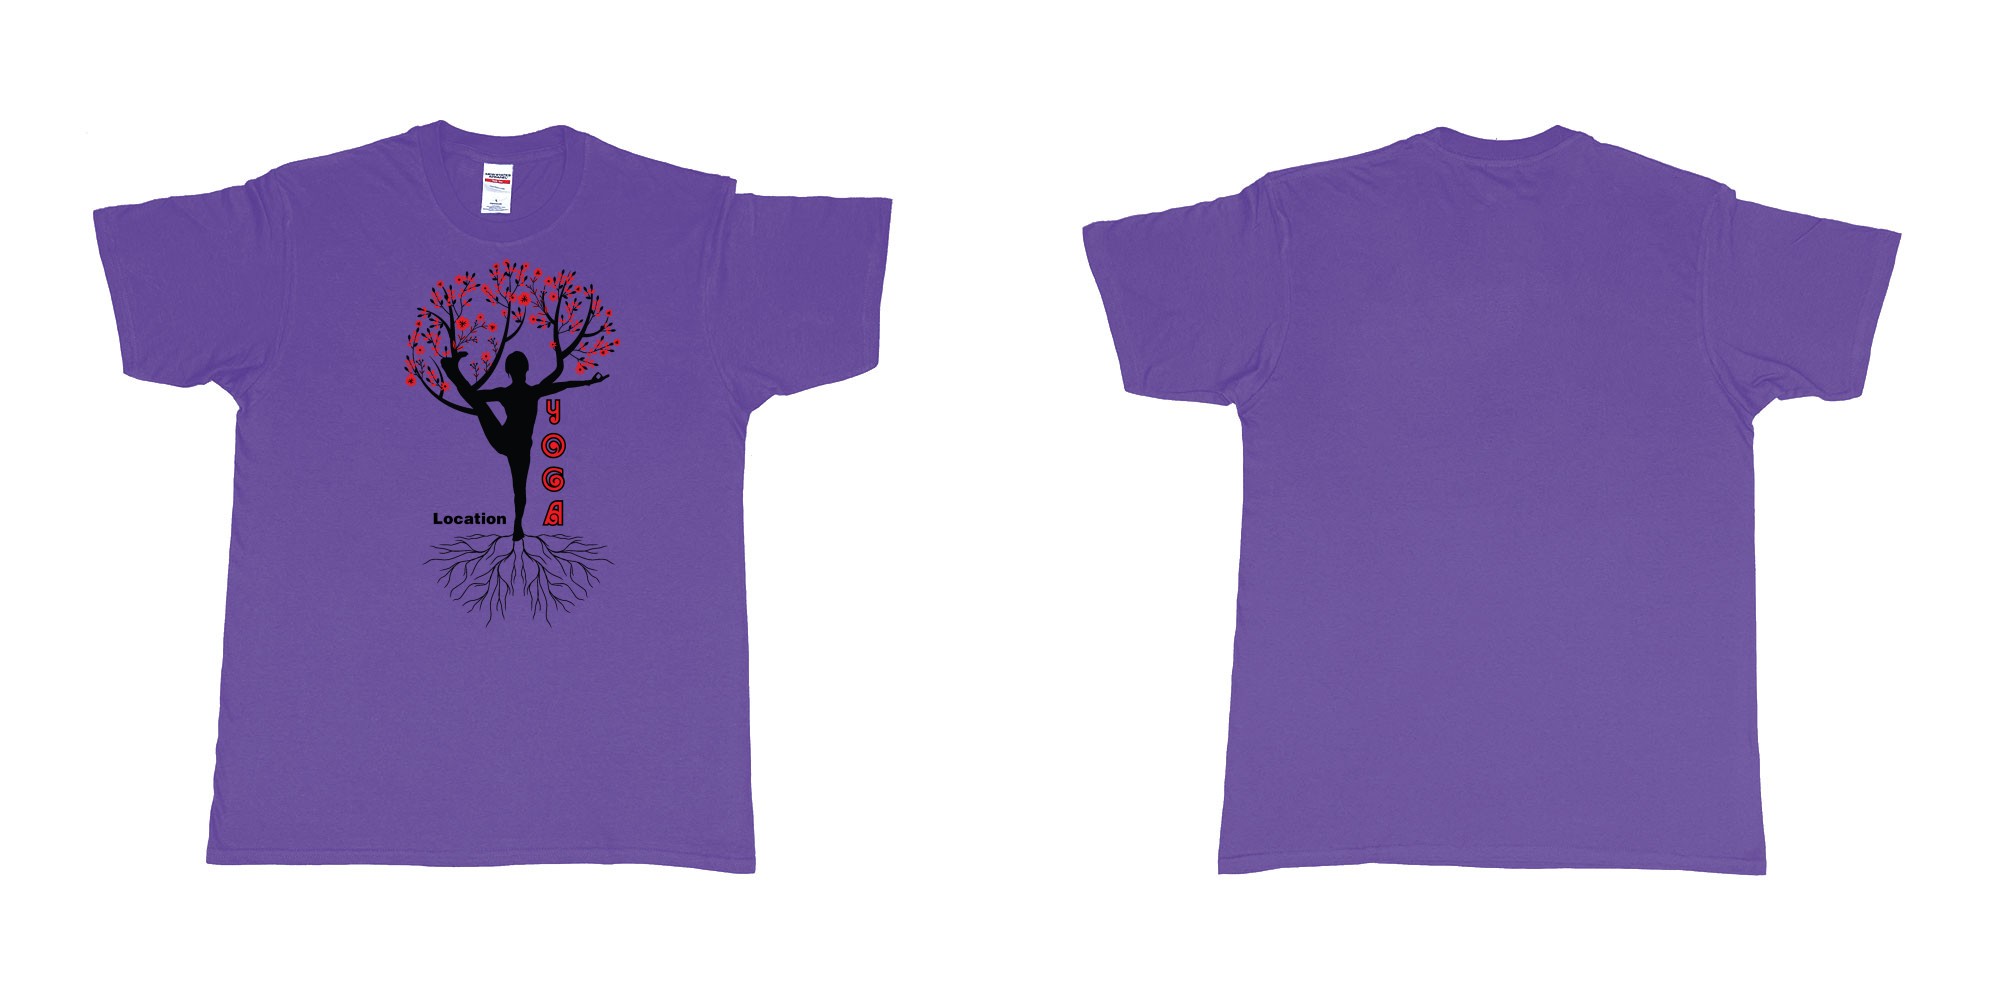 Custom tshirt design yoga tree of life is blooming own logo location design in fabric color purple choice your own text made in Bali by The Pirate Way